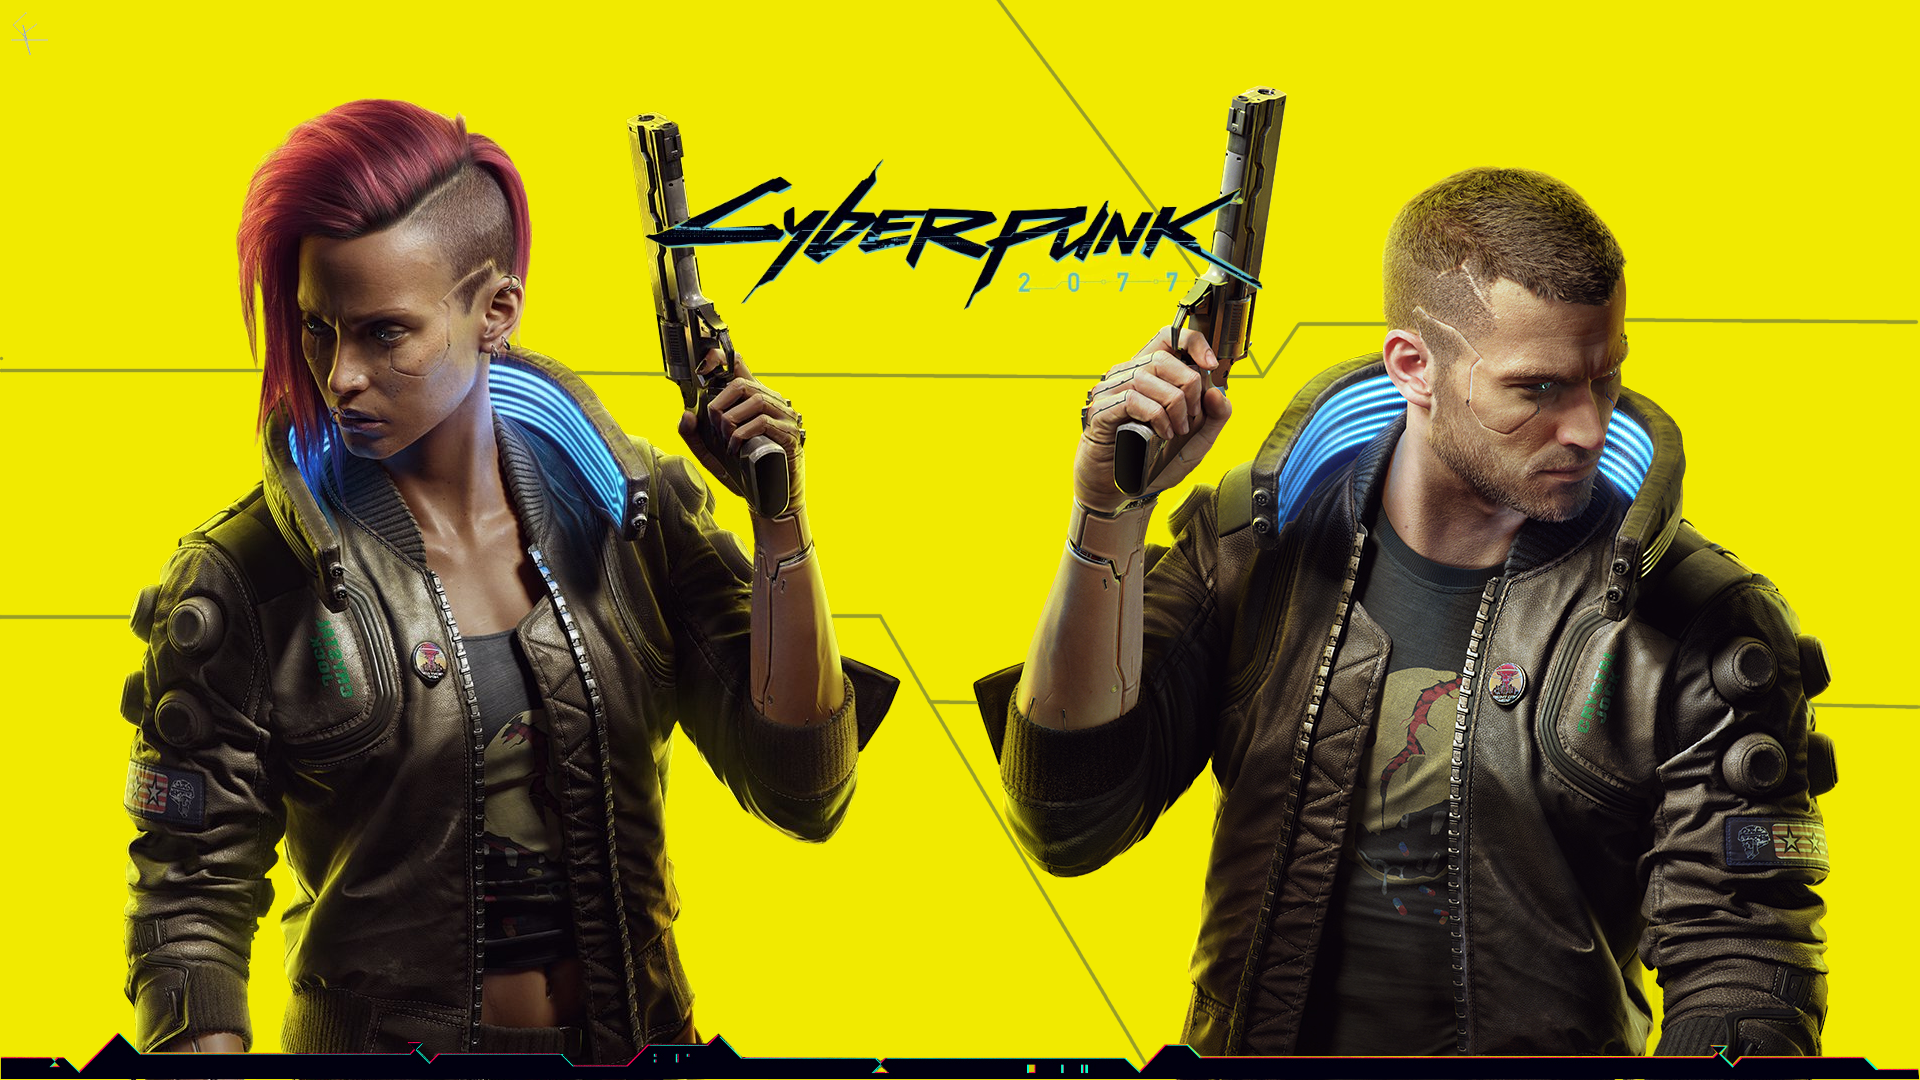 General 1920x1080 Cyberpunk 2077 video game characters yellow background video games